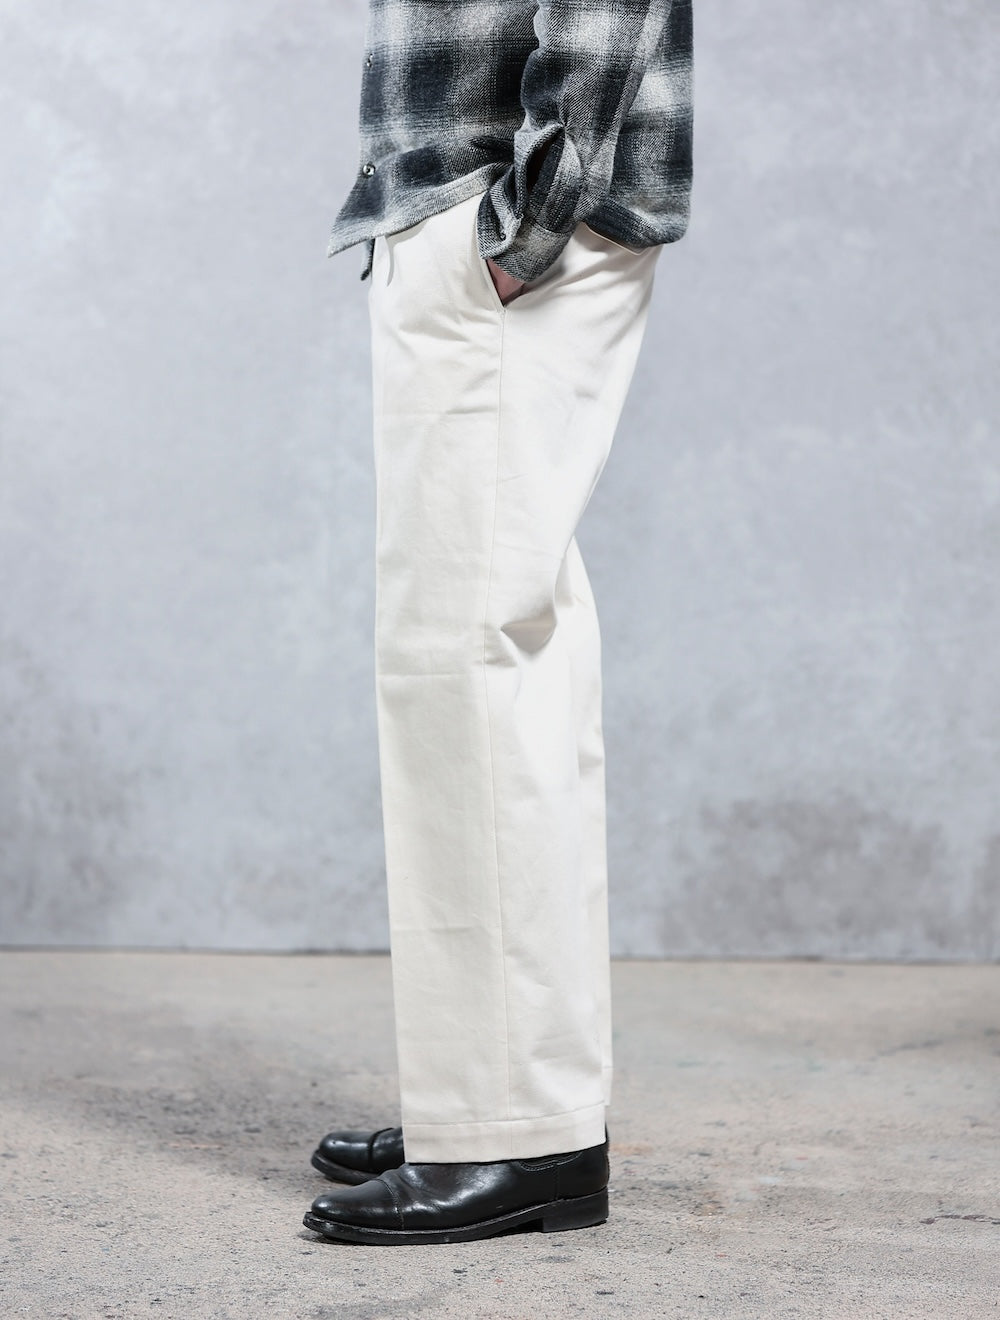 ACV-TR02KT SINGLE-PLEATED COTTON ARMY TROUSERS - IVORY - May club